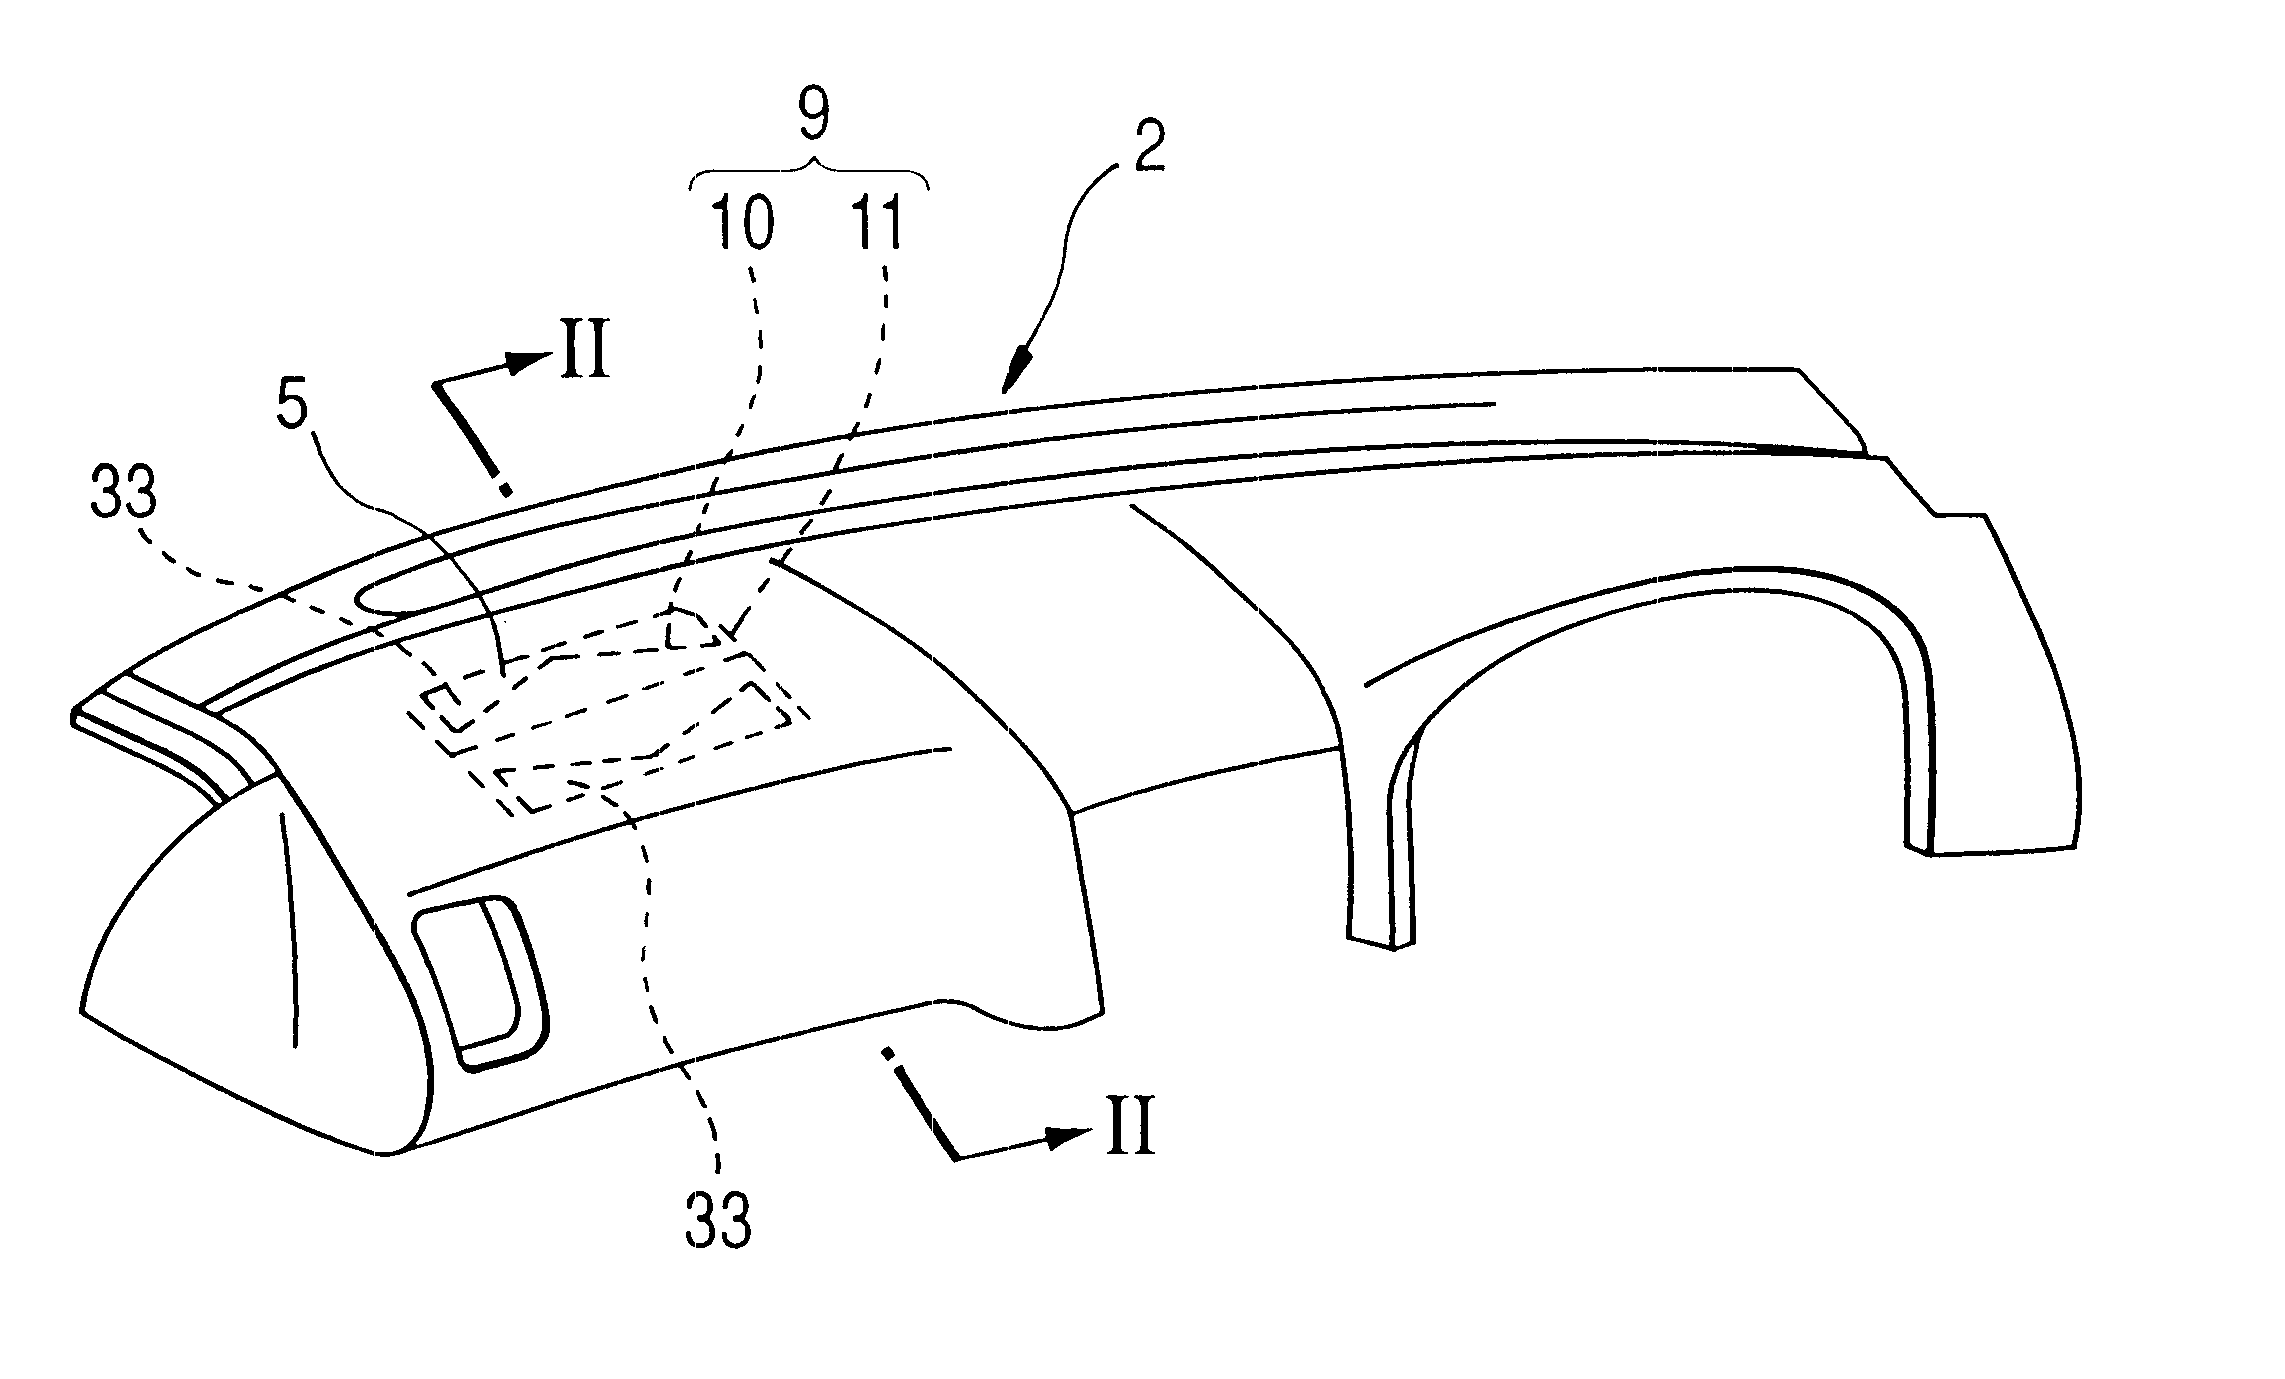 Vehicular air-bag lid structure